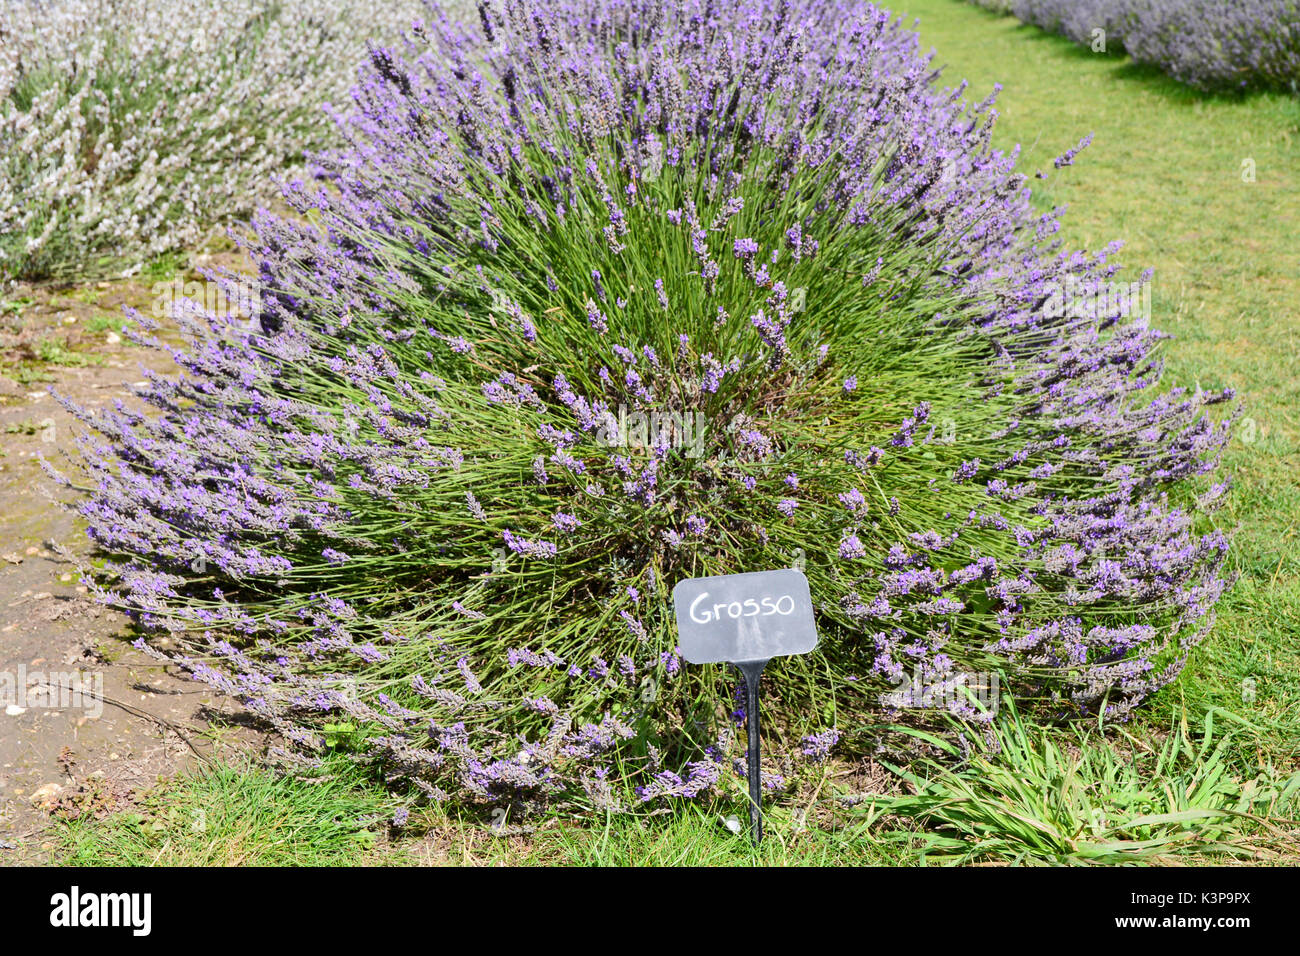 Grosso Lavender (lavandula) flowers with label Stock Photo